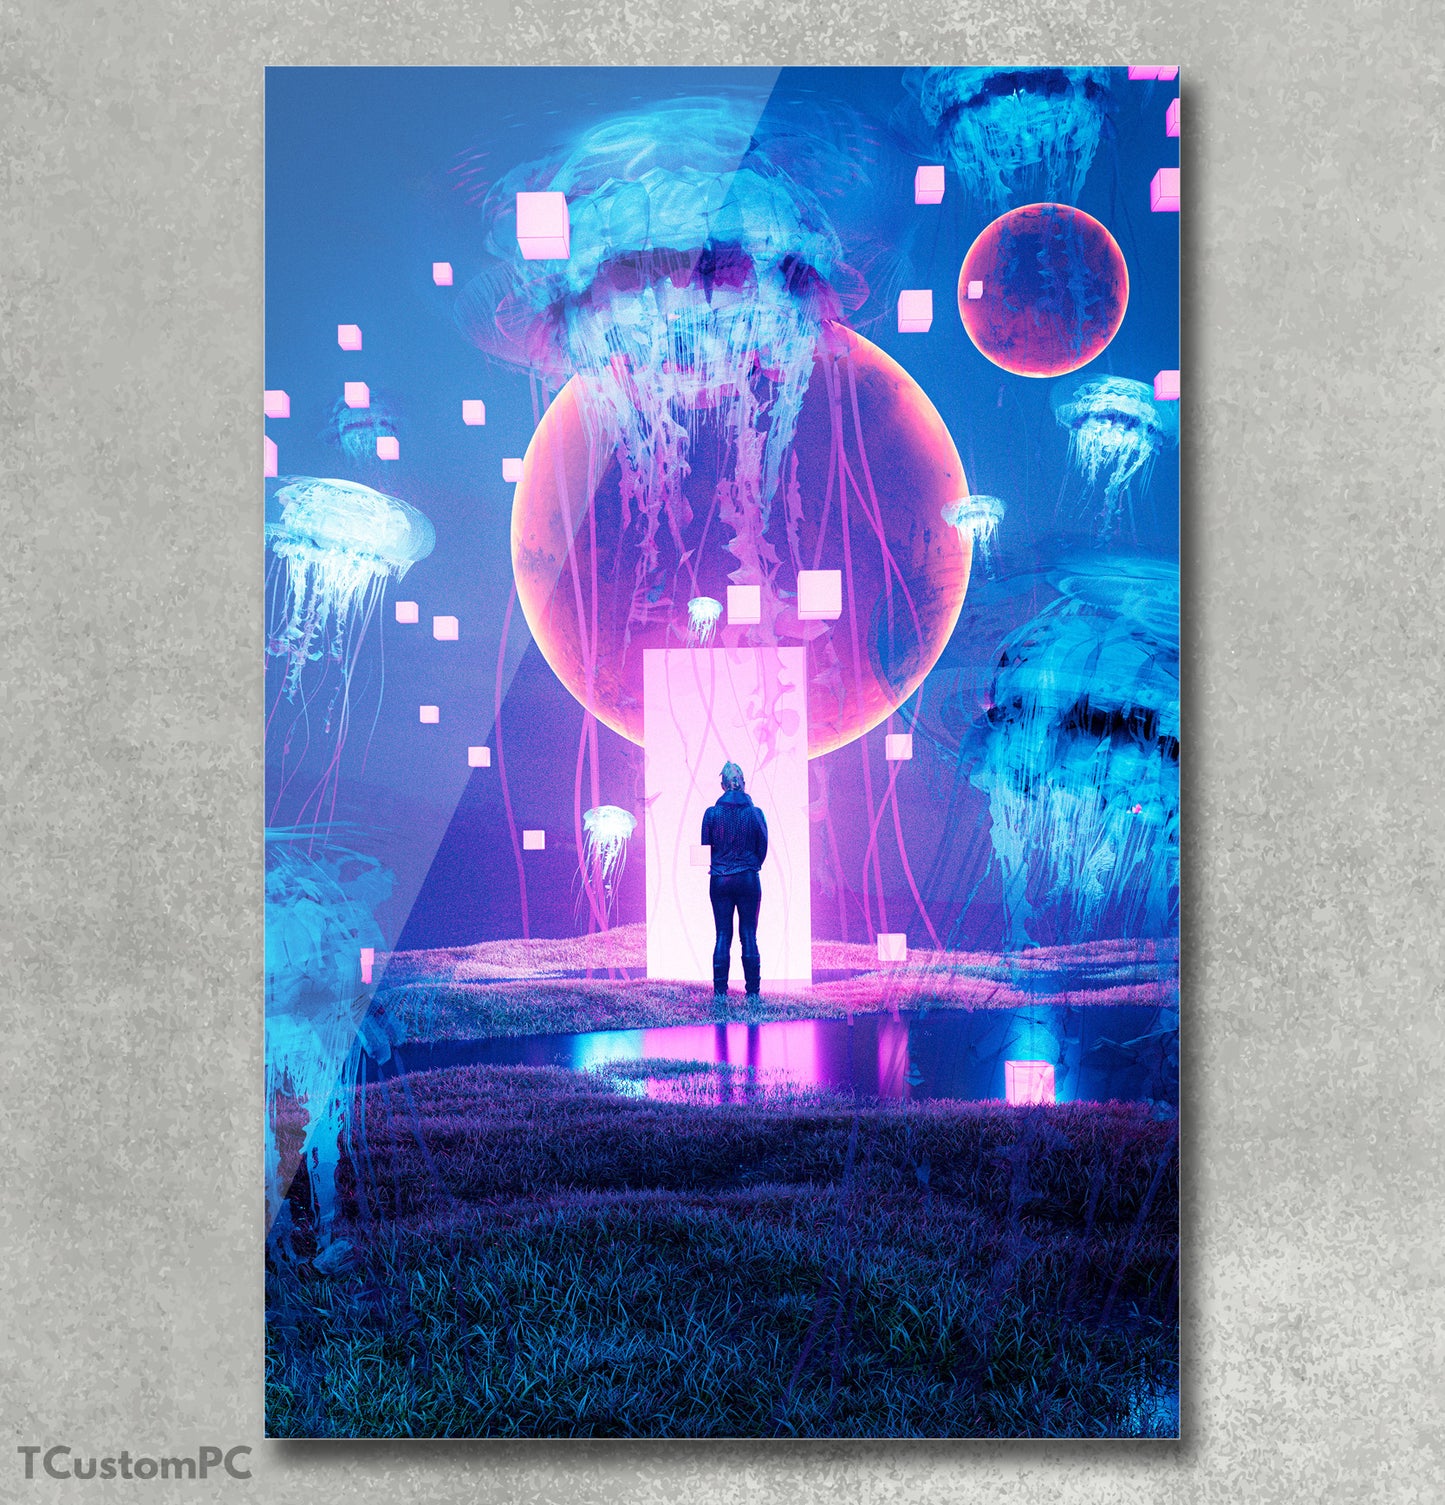 Landscape painting "Jelly dream"